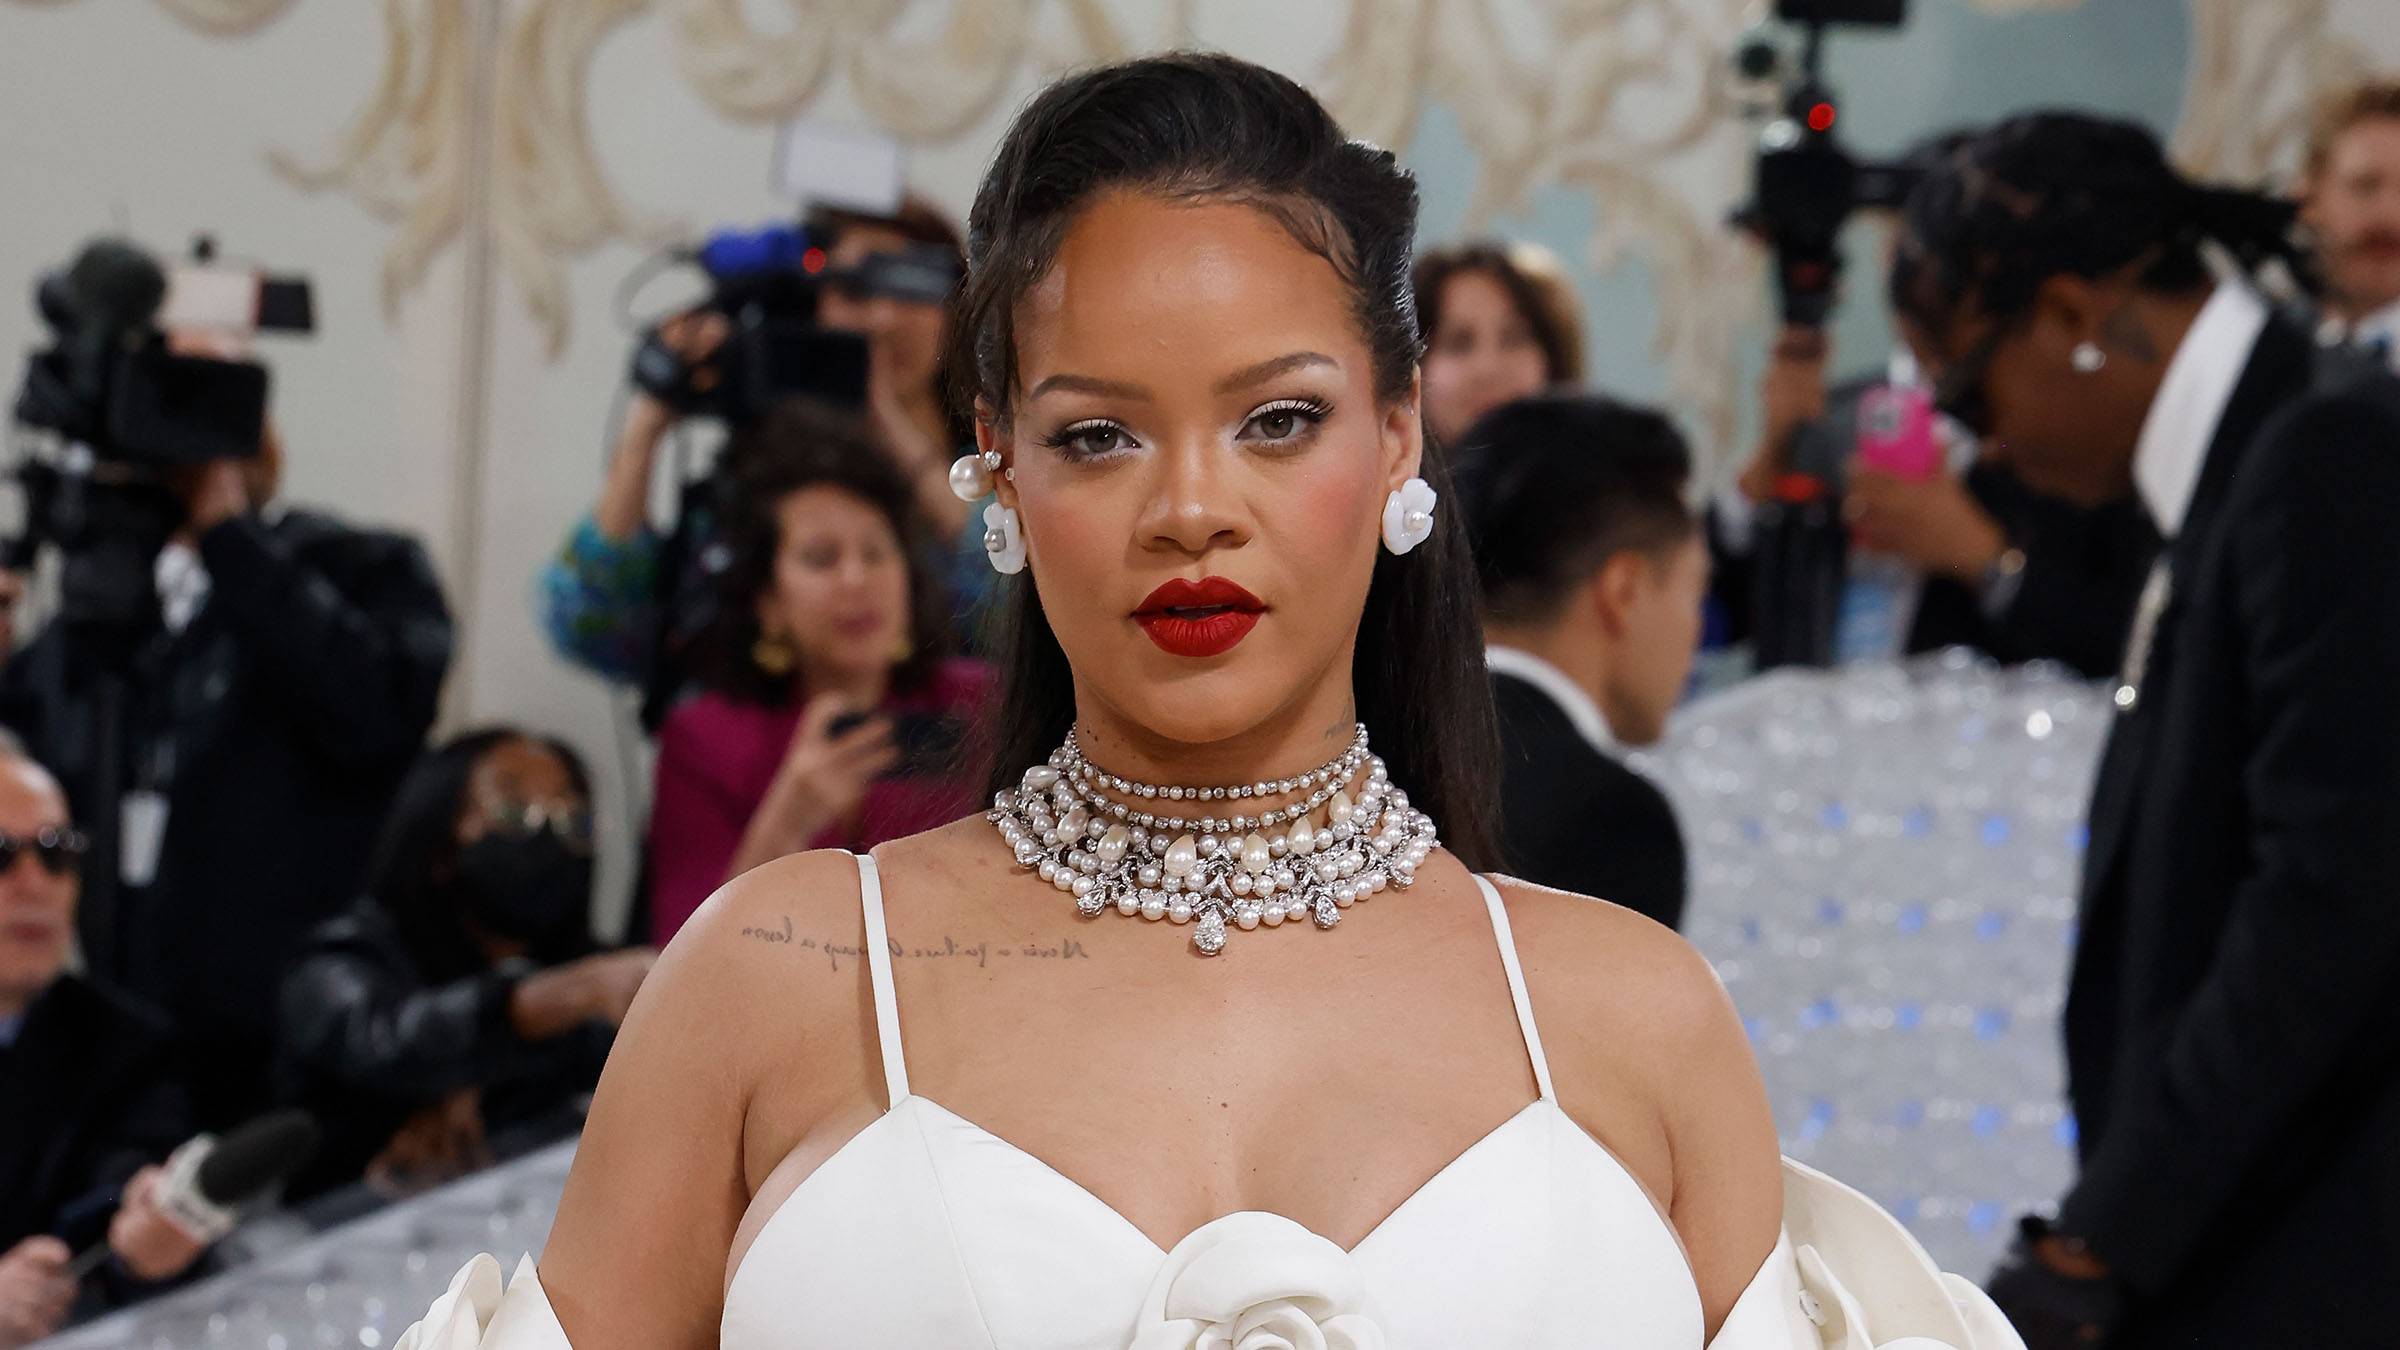 Rihanna Glows While Posing in Red Lingerie for Savage X Fenty Photoshoot, News